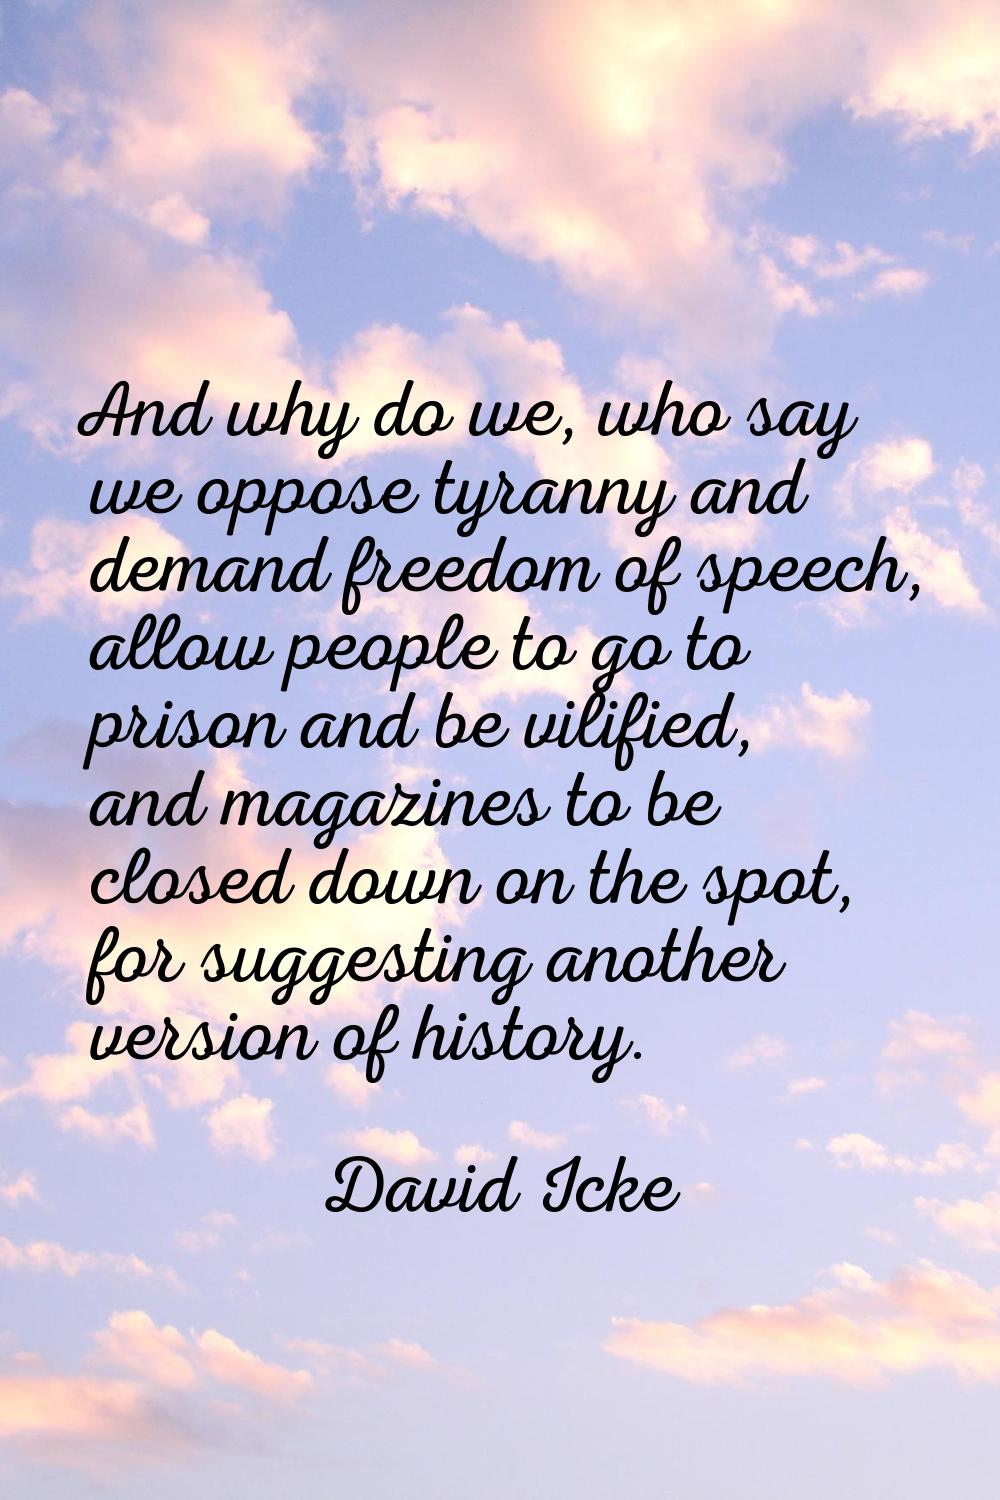 And why do we, who say we oppose tyranny and demand freedom of speech, allow people to go to prison